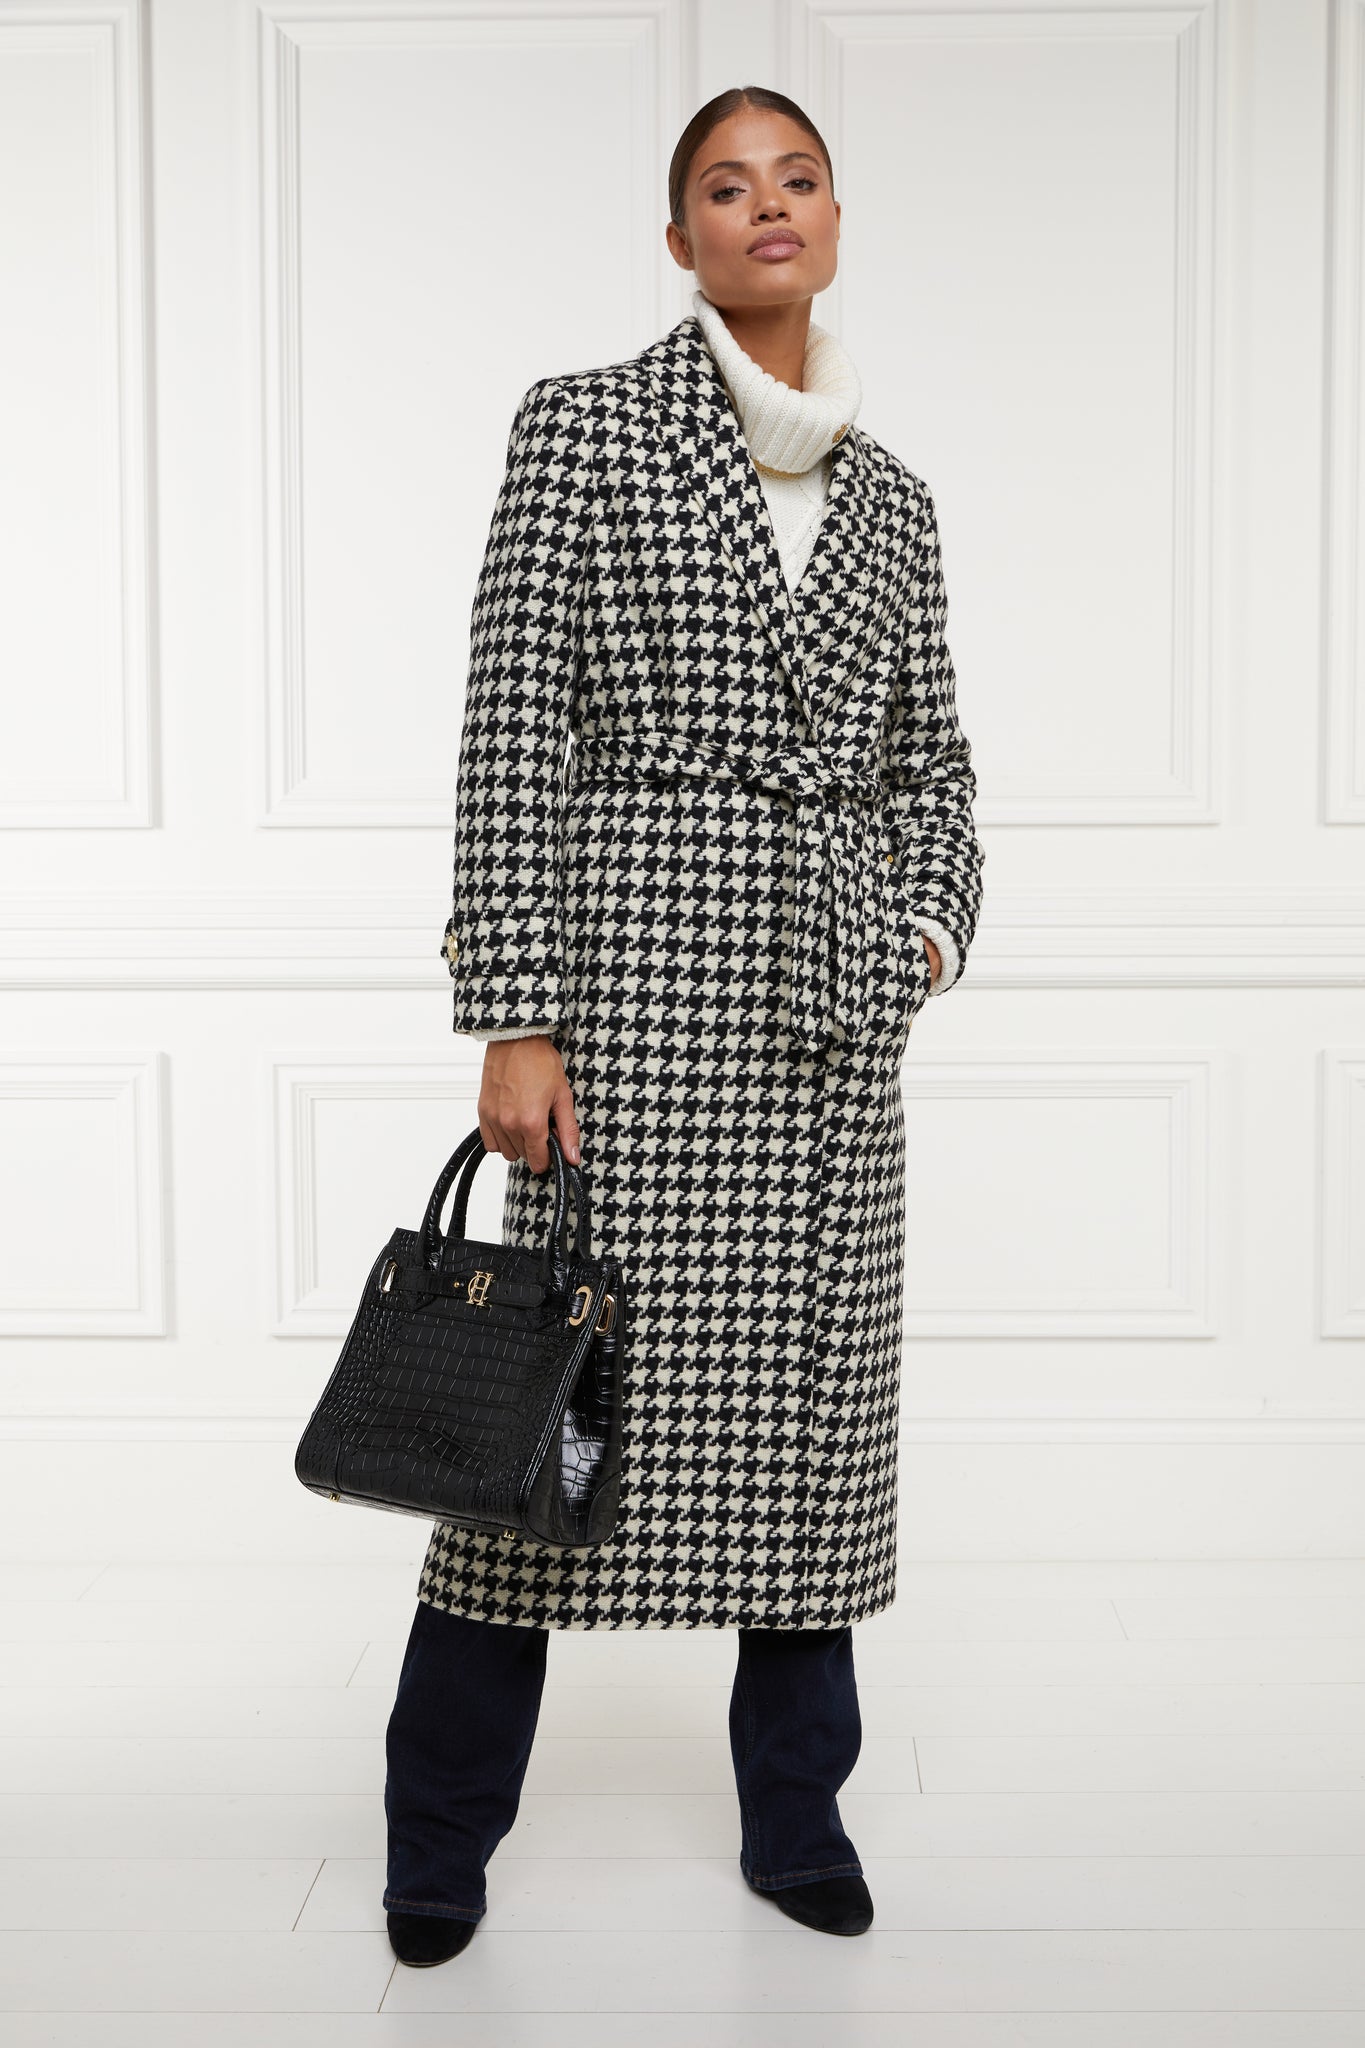 Womens black and white large houndstooth mid length wrap coat with tie belt and black croc embossed leather tote bag